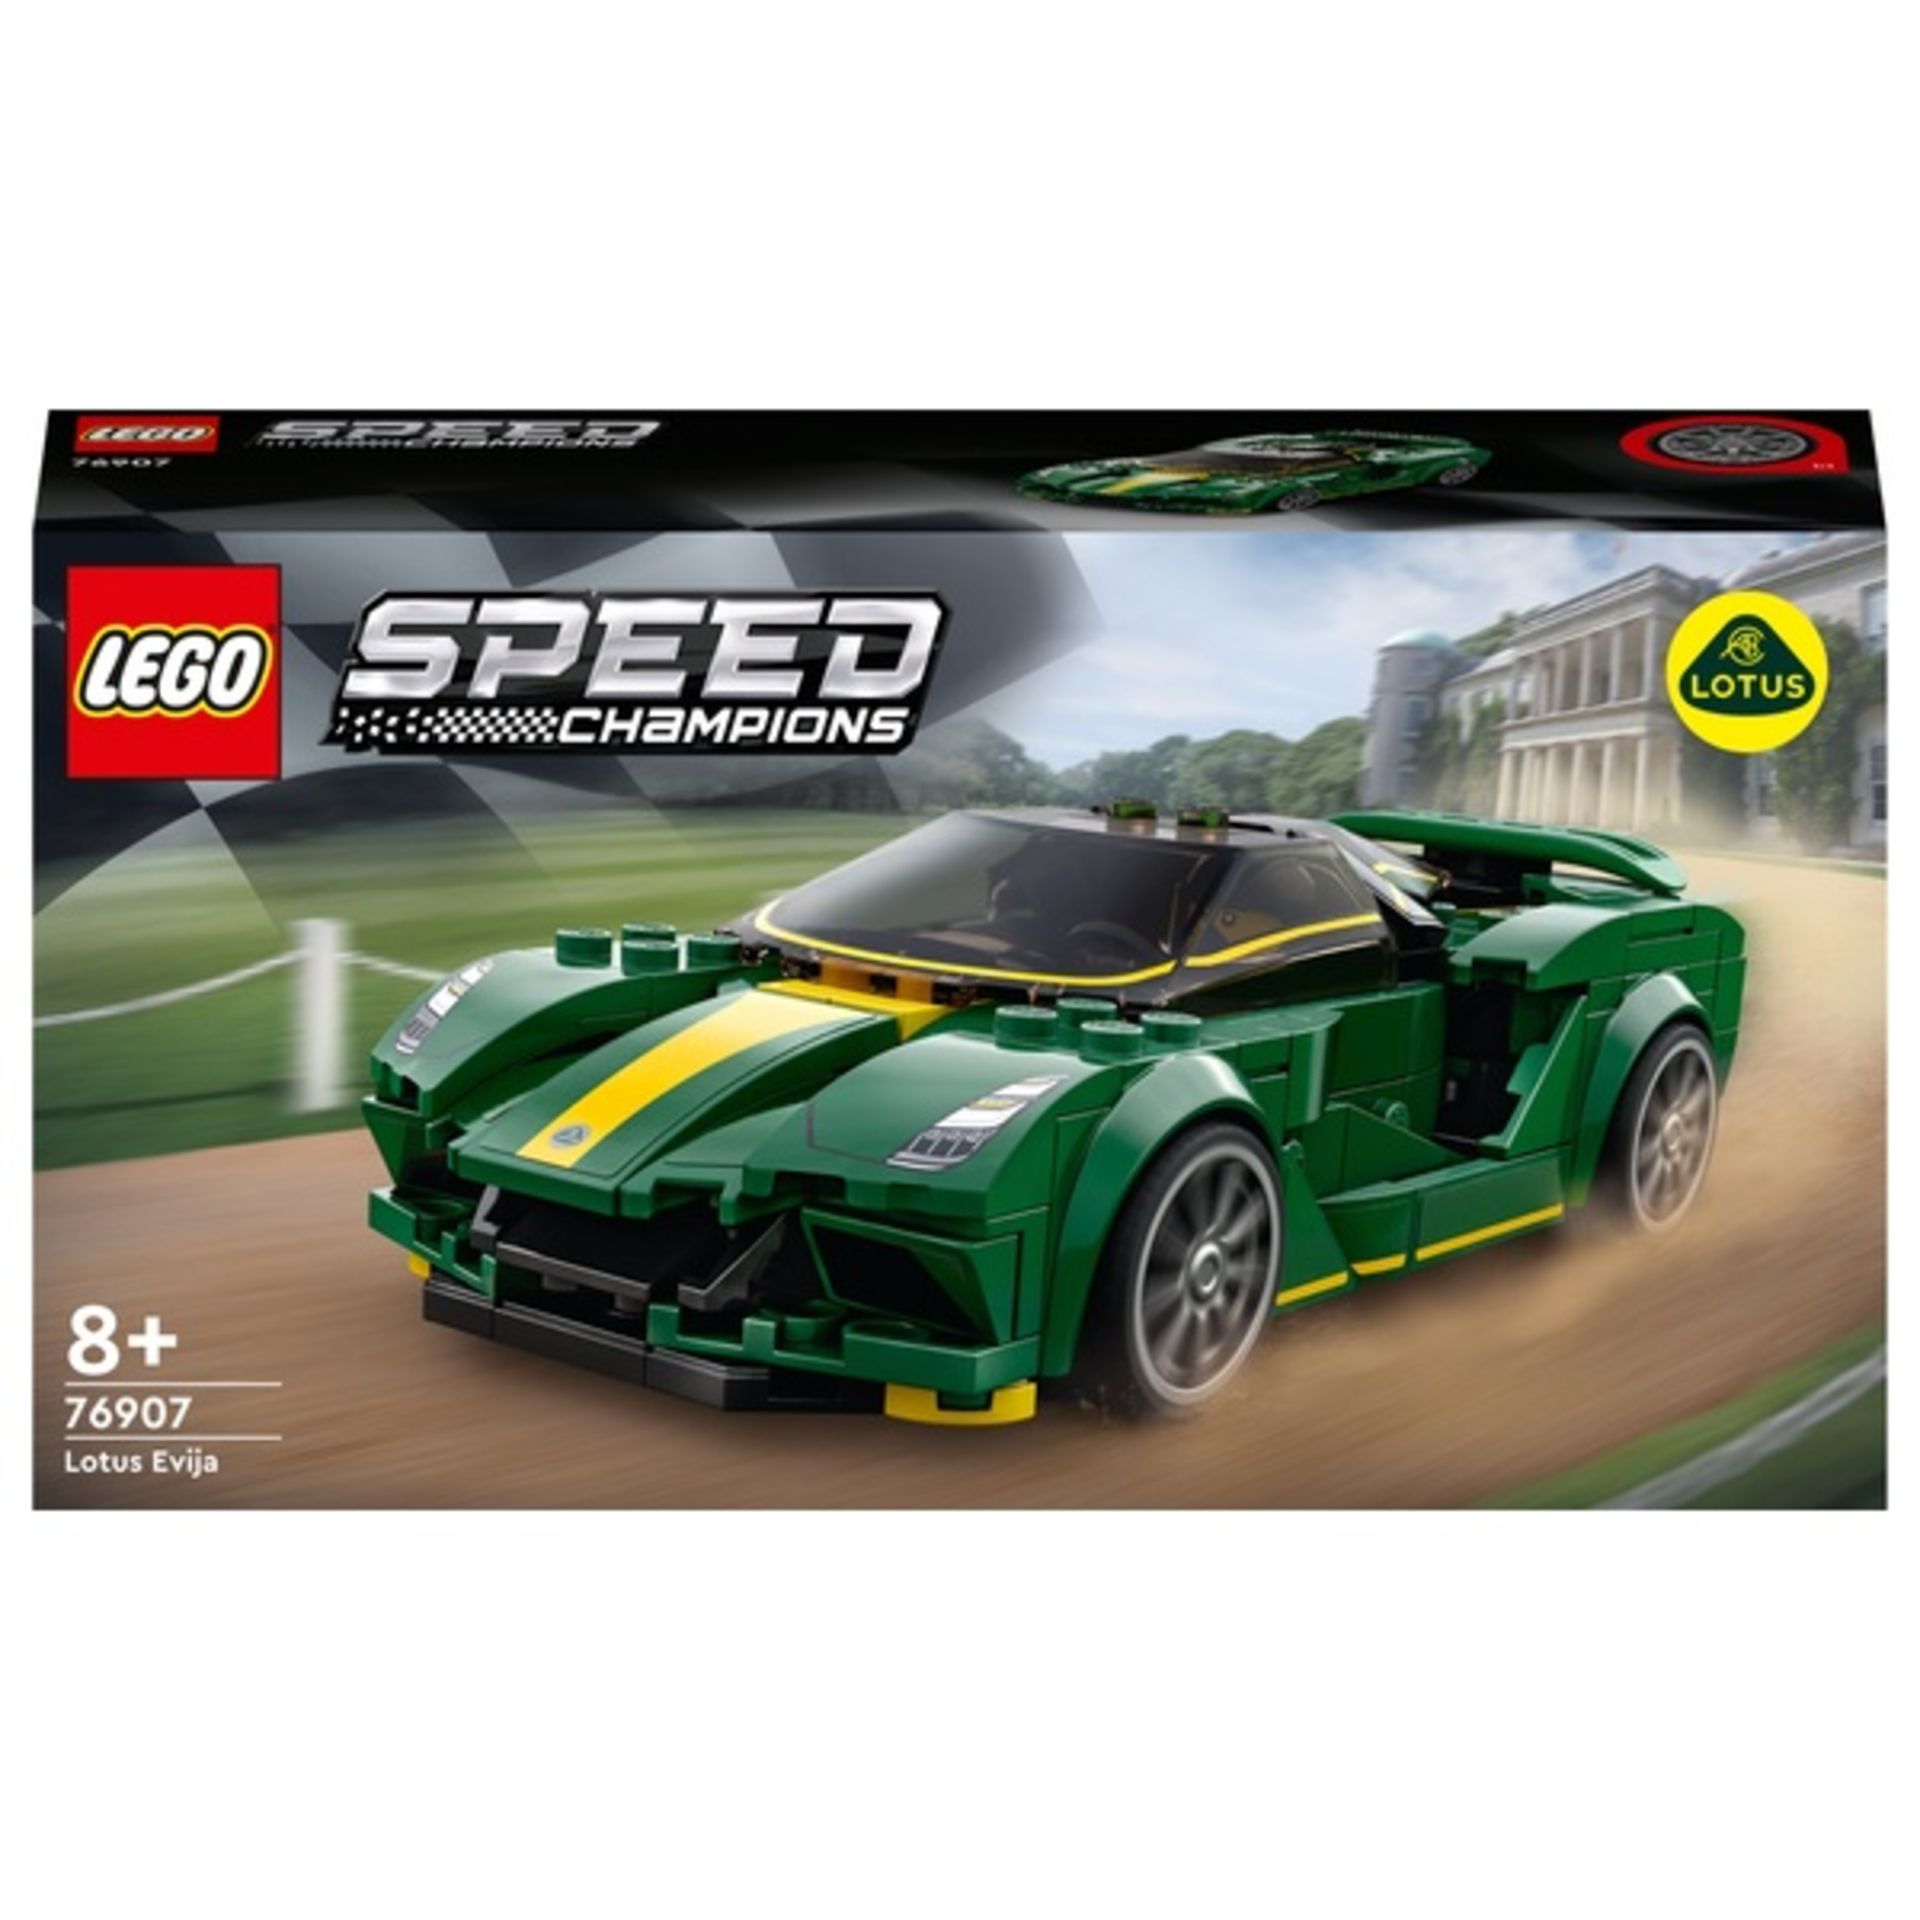 RRP - £17.99 LEGO 76907 Speed Champions Lotus Evija Race Car Toy Model for Kids, Collectible Set wit